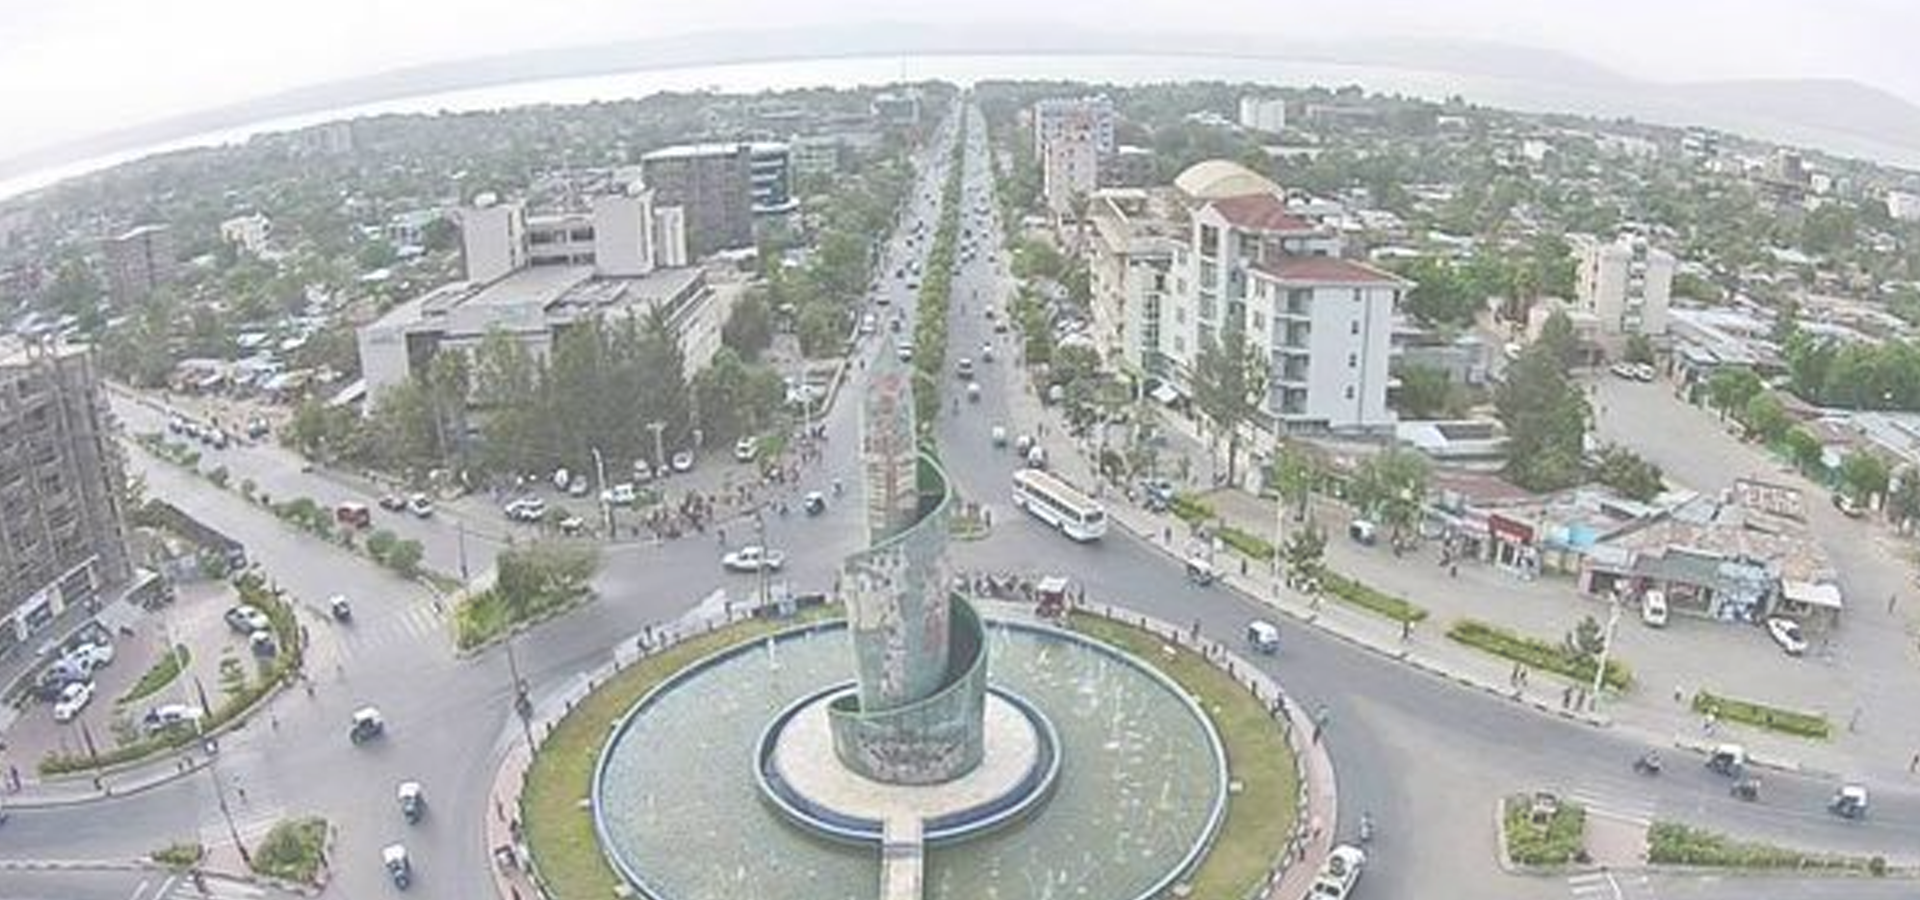 <b>Africa/Addis_Ababa/Southern_Nations_Nationalities_and_Peoples_Region</b>